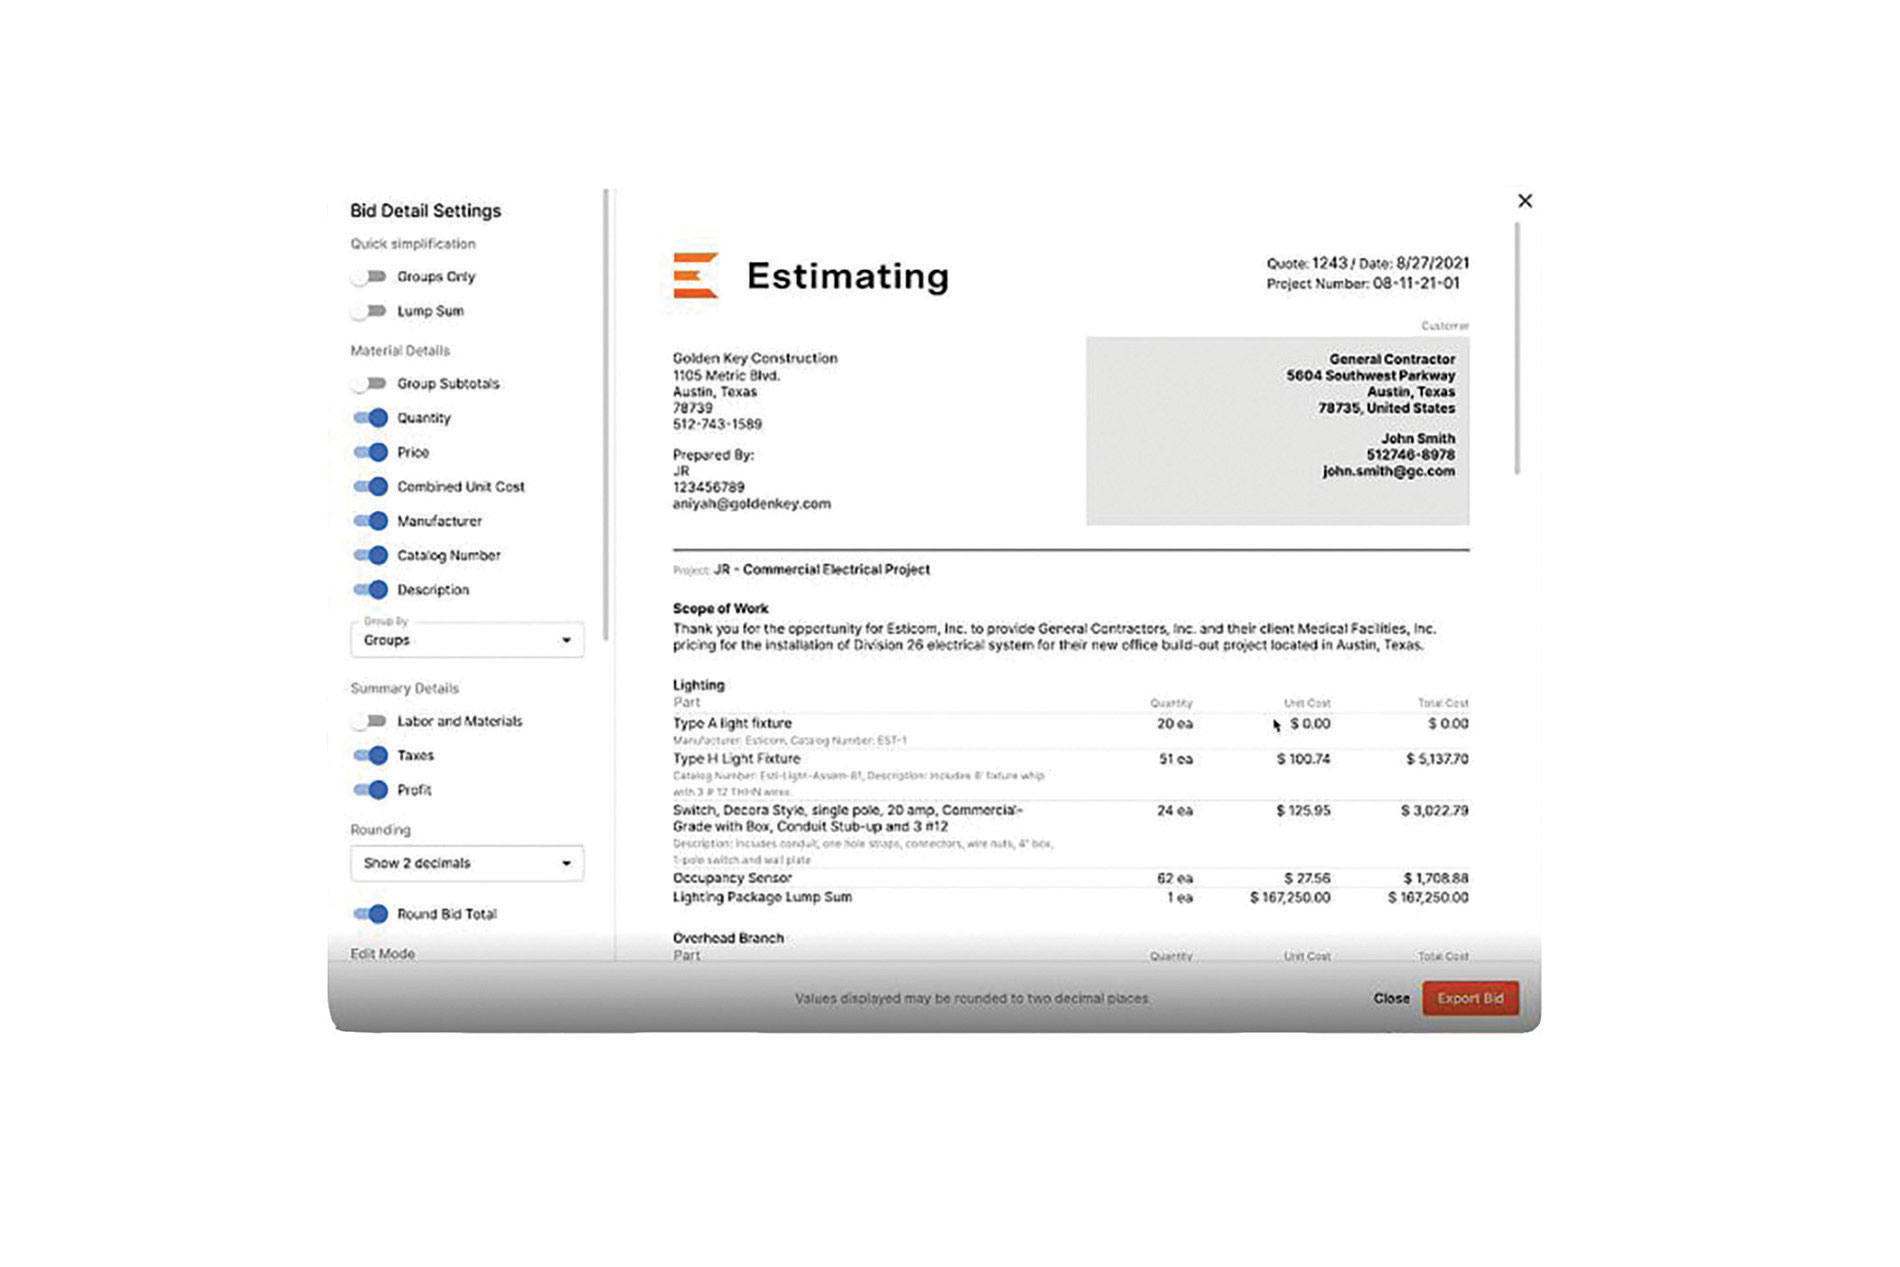 Estimating software screenshot. Image by Procore.